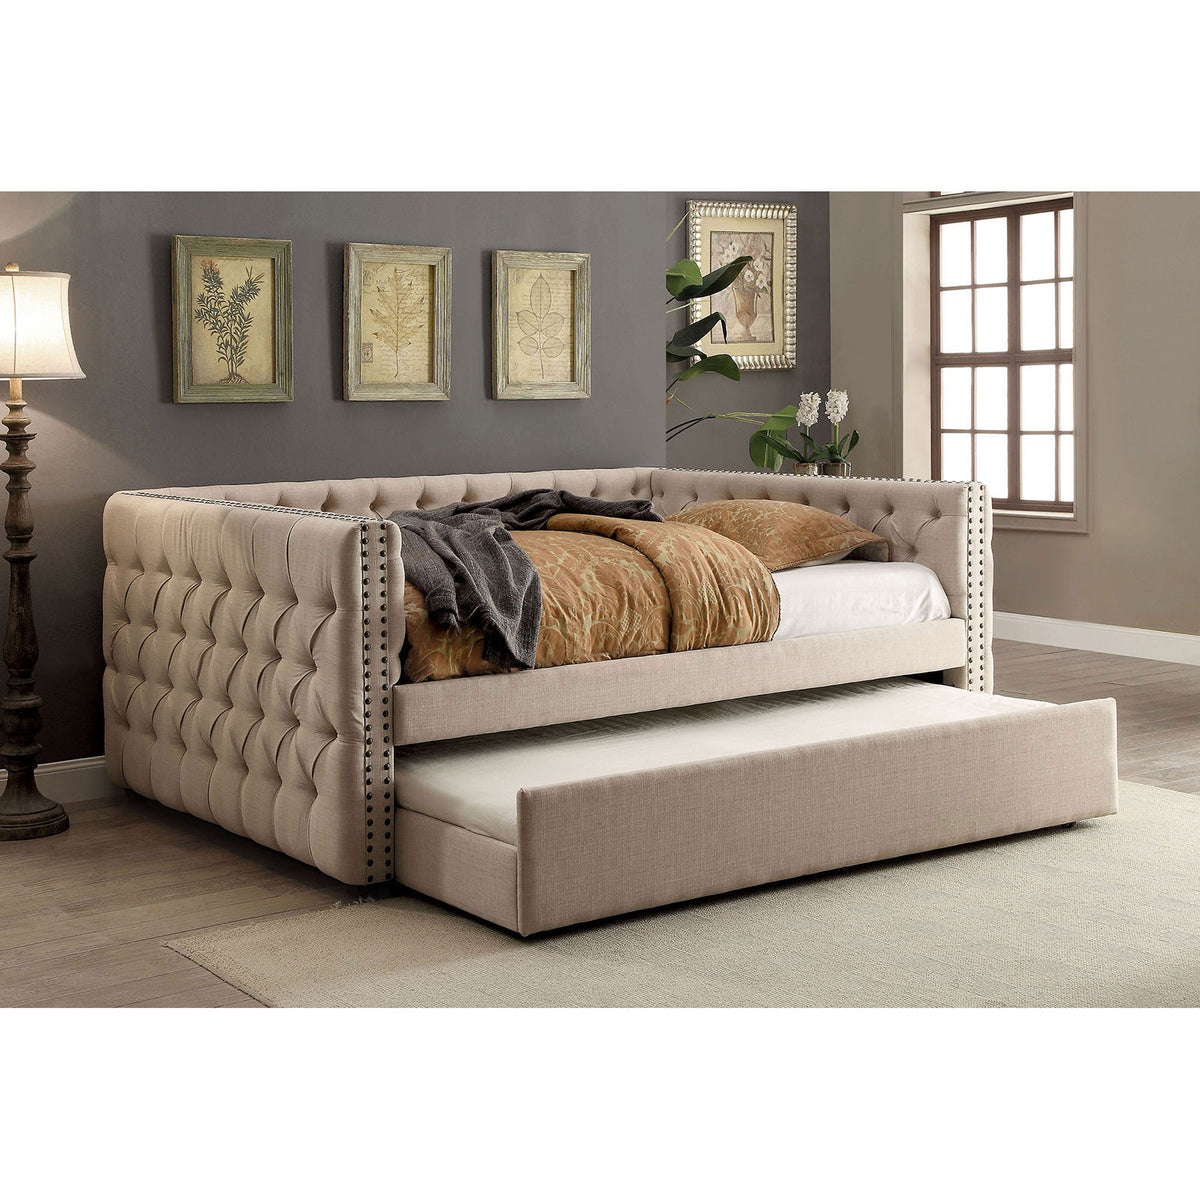 SUZANNE Ivory Twin Daybed - Half Price Furniture